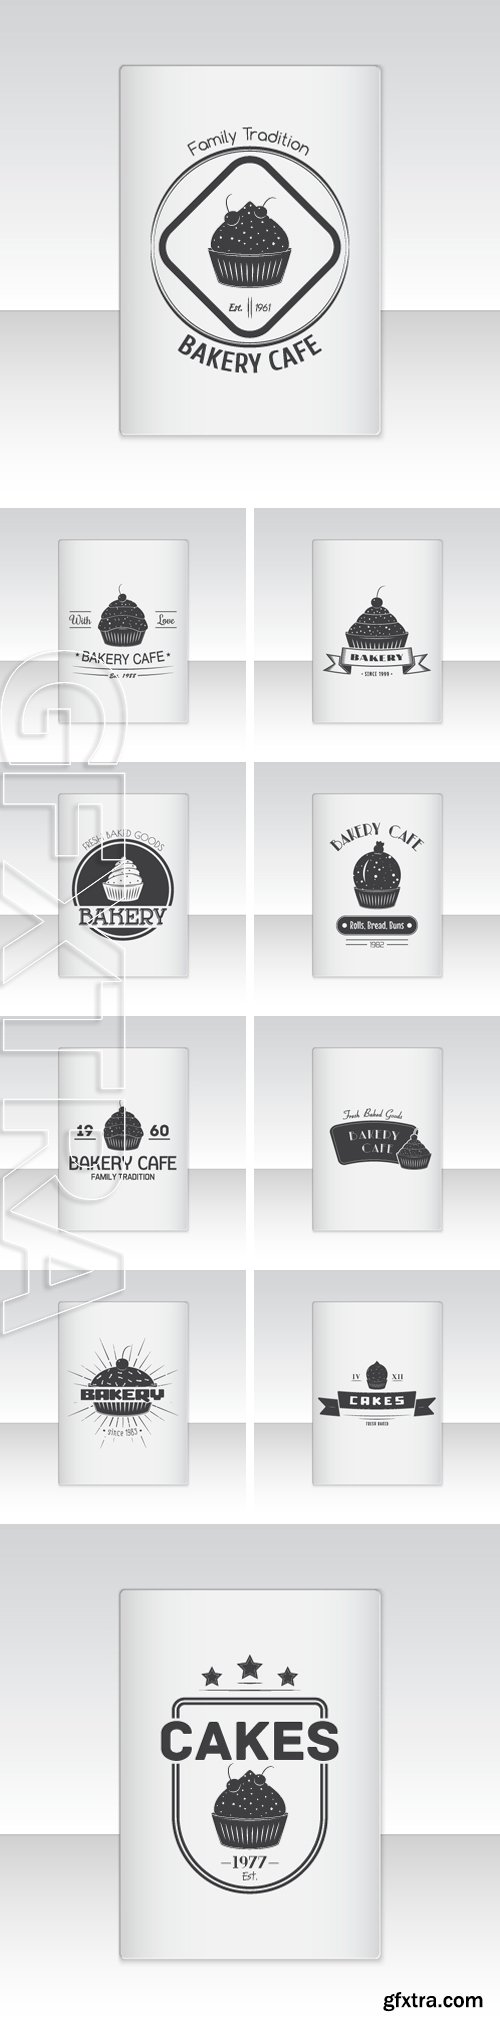 Stock Vectors - Bakery cafe. The food and service. Sheet of white paper. Typographic labels, logos and badges. Flat vector illustration